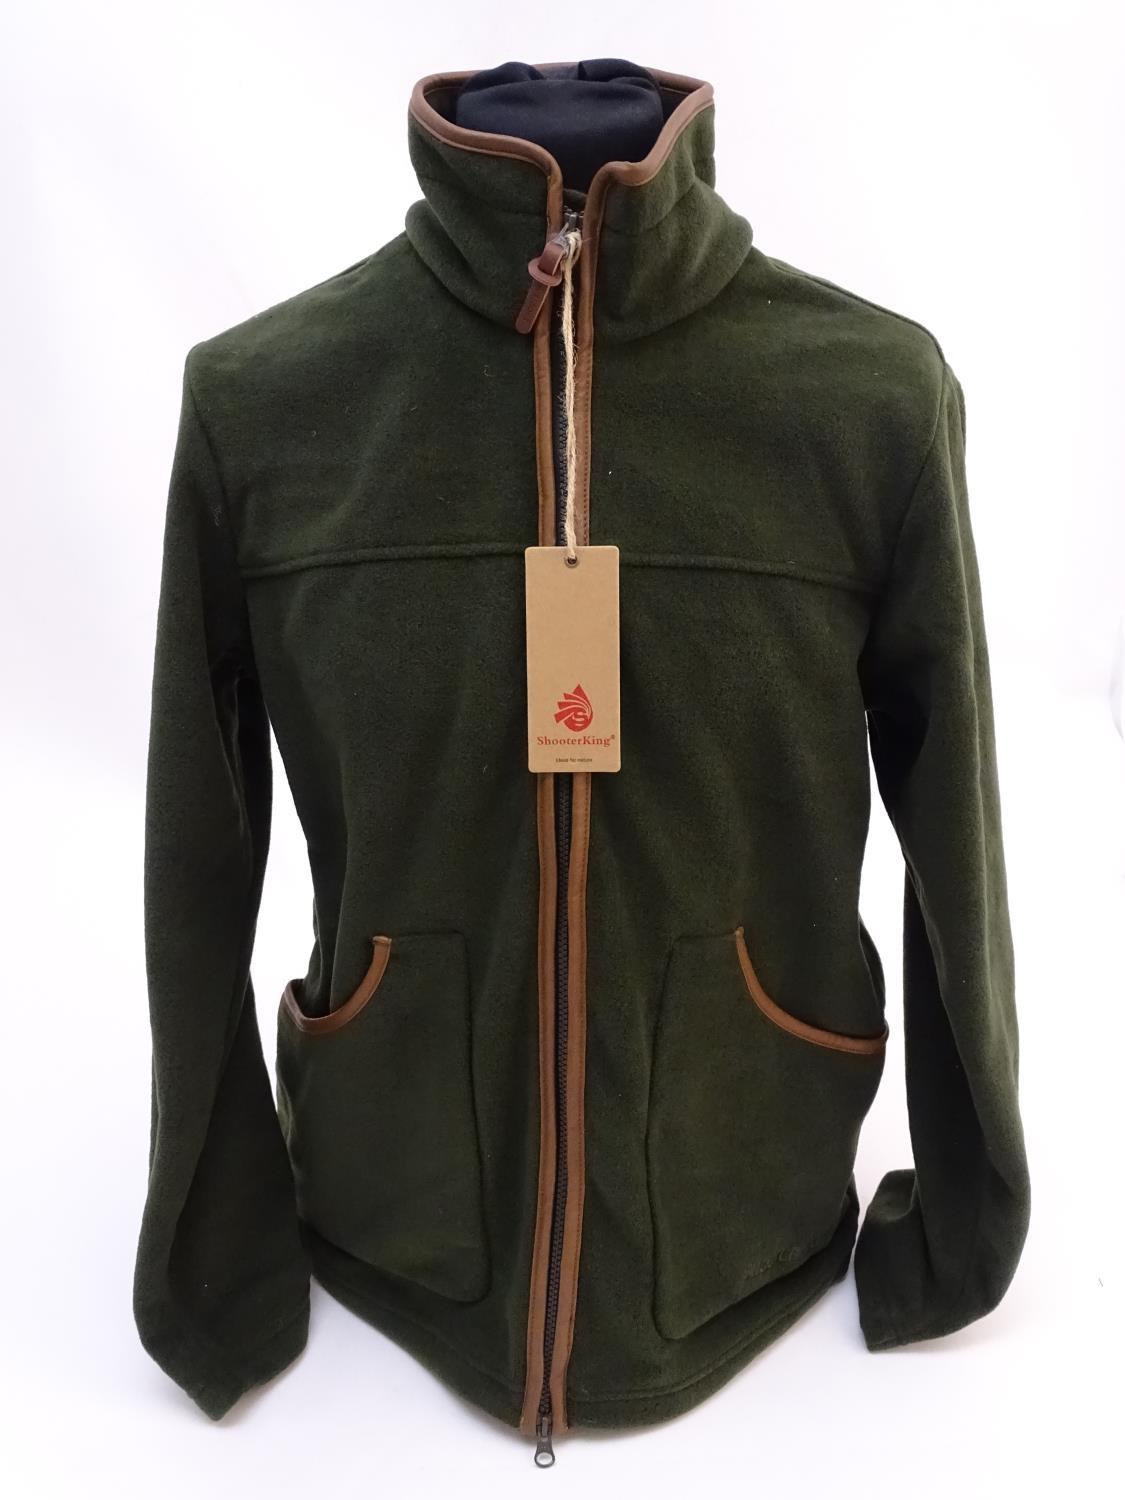 A Shooter King green fleece, size L, with tags. Please Note - we do not make reference to the